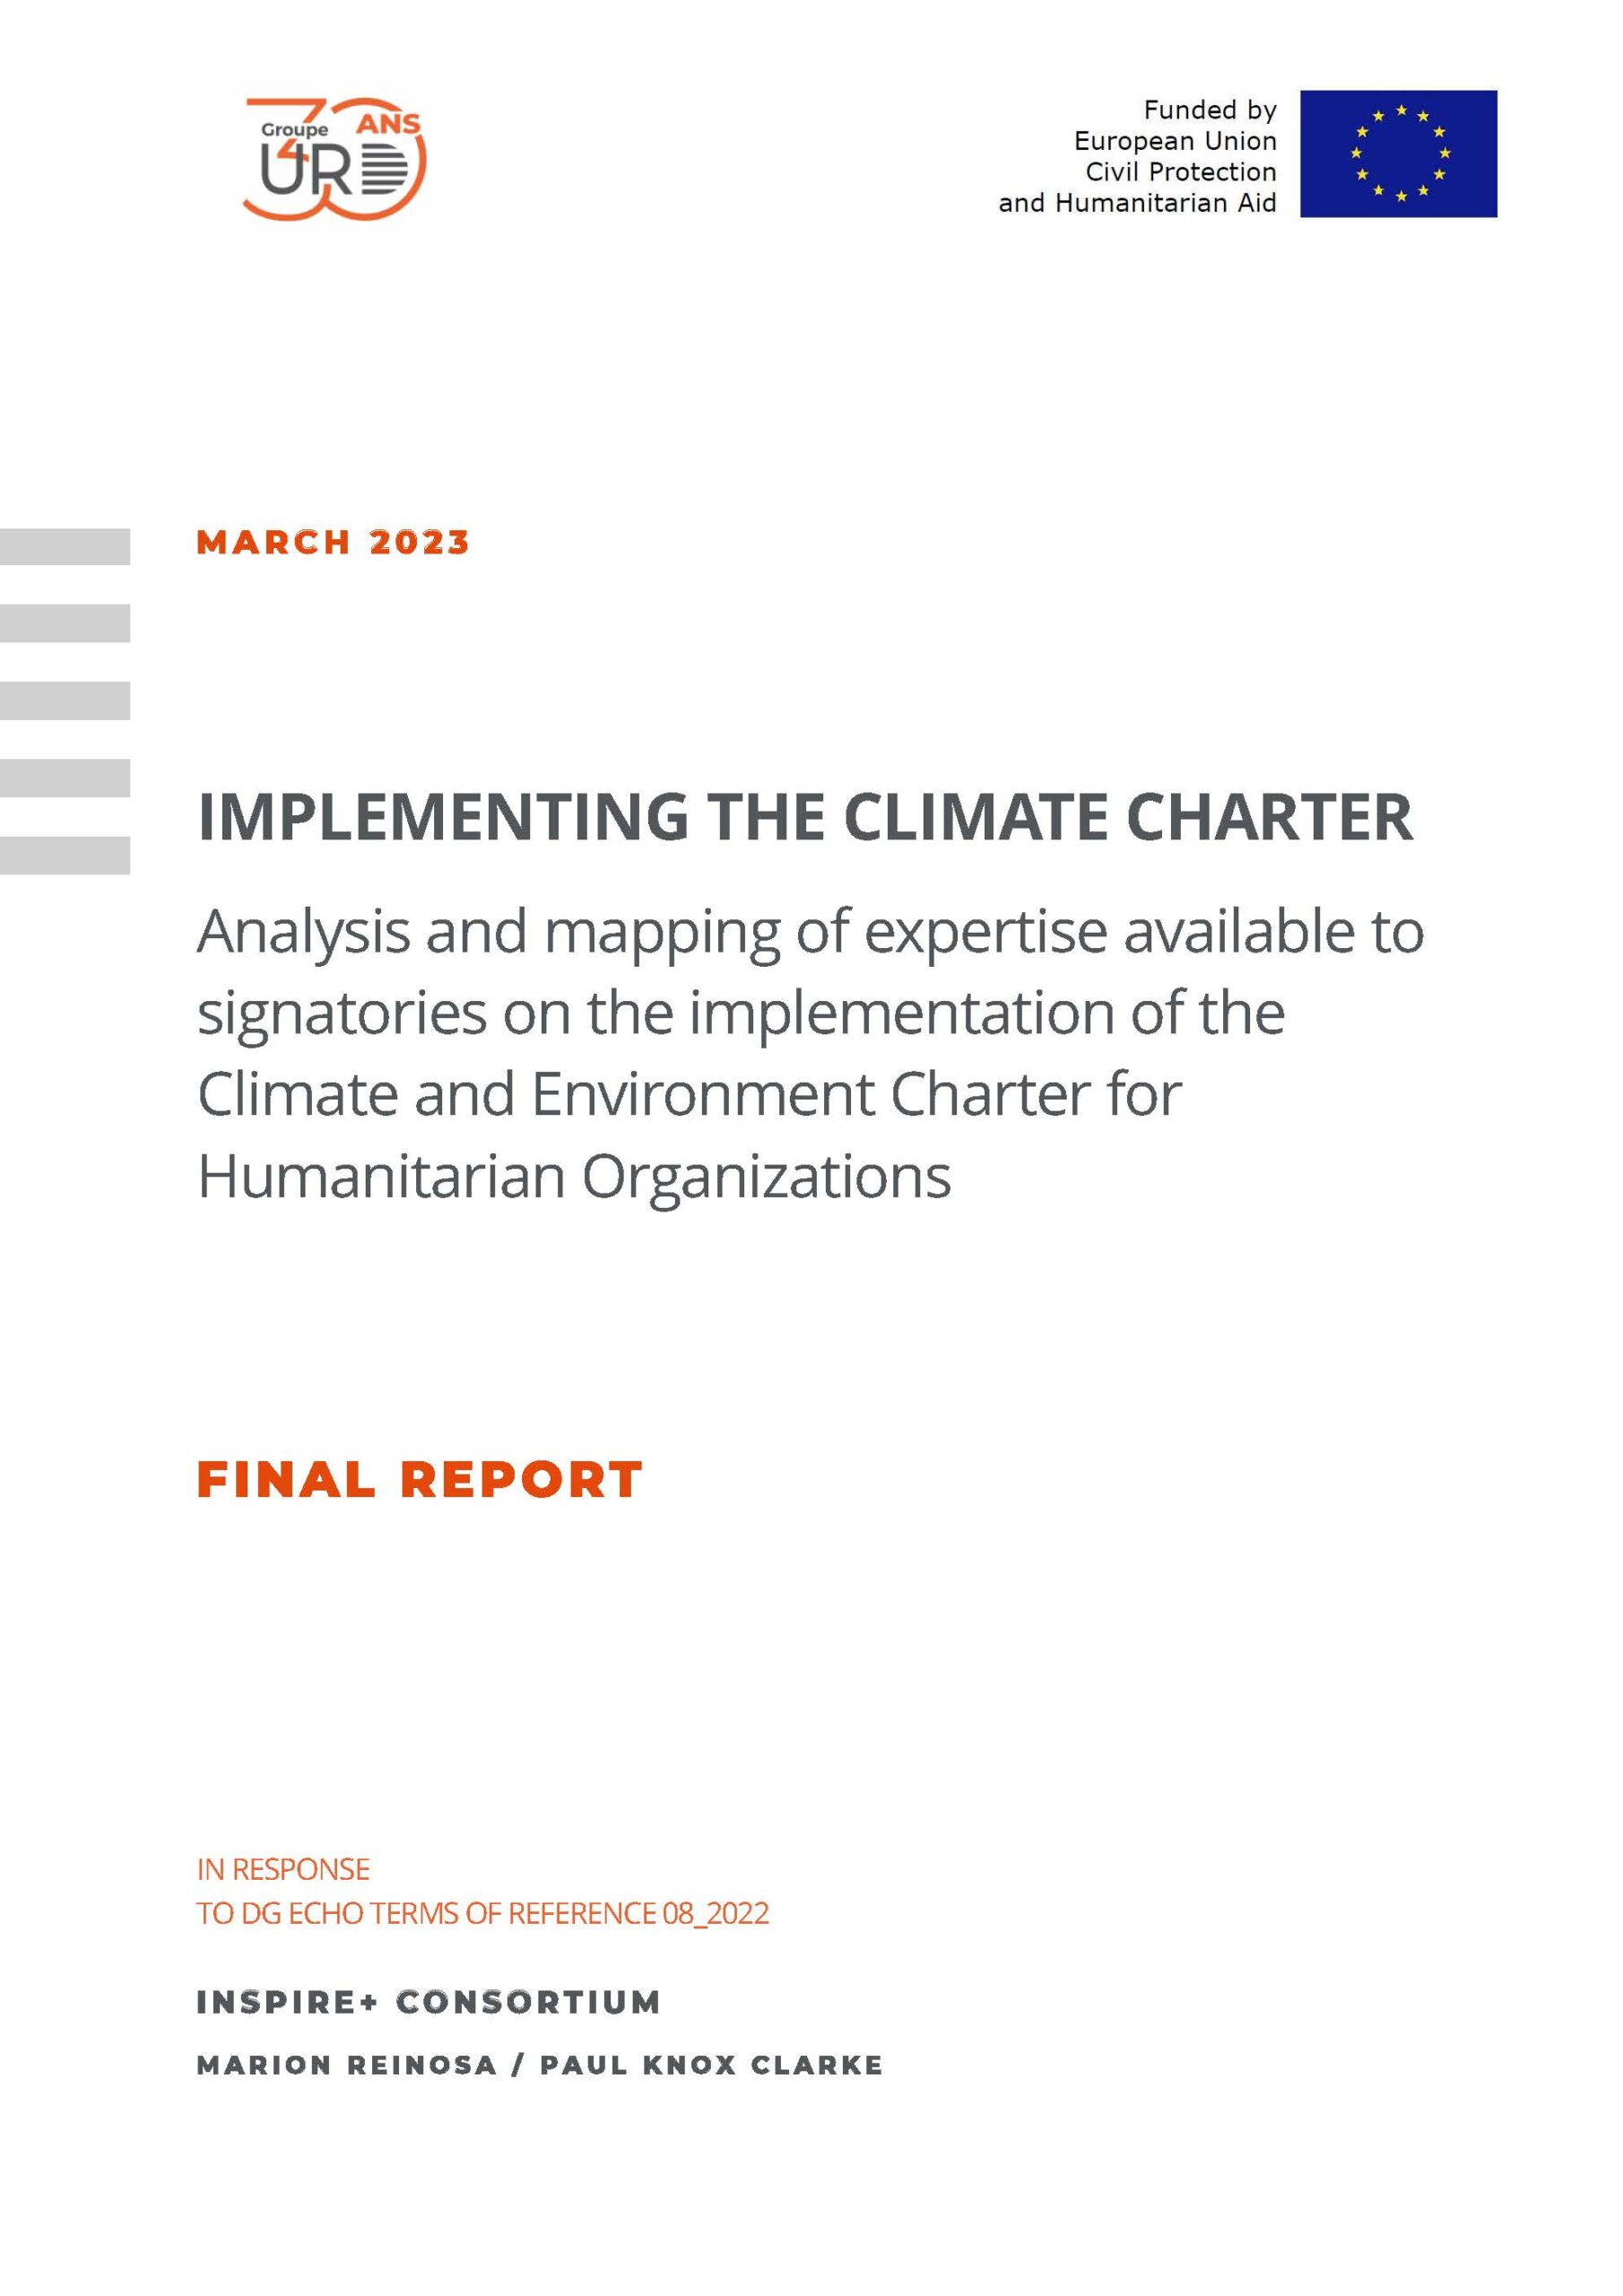 Implementing the Climate Charter 1